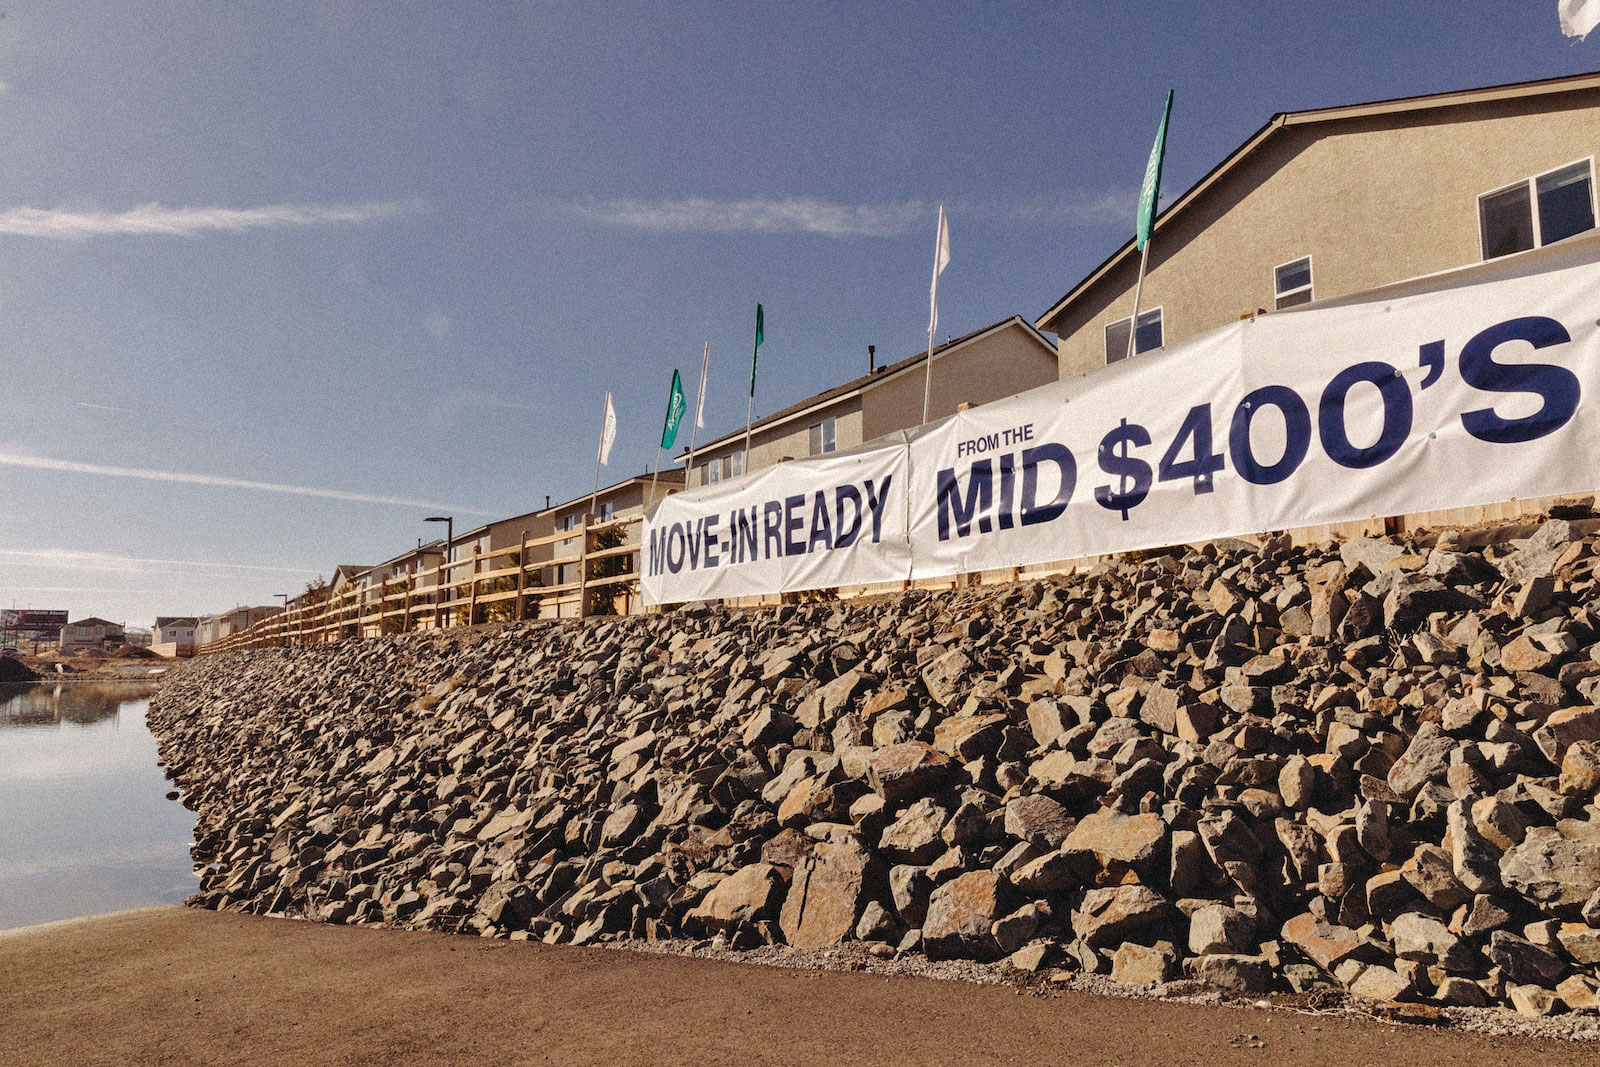 a large rock wall with houses has a sign that reads "move-in ready mid-$400s"